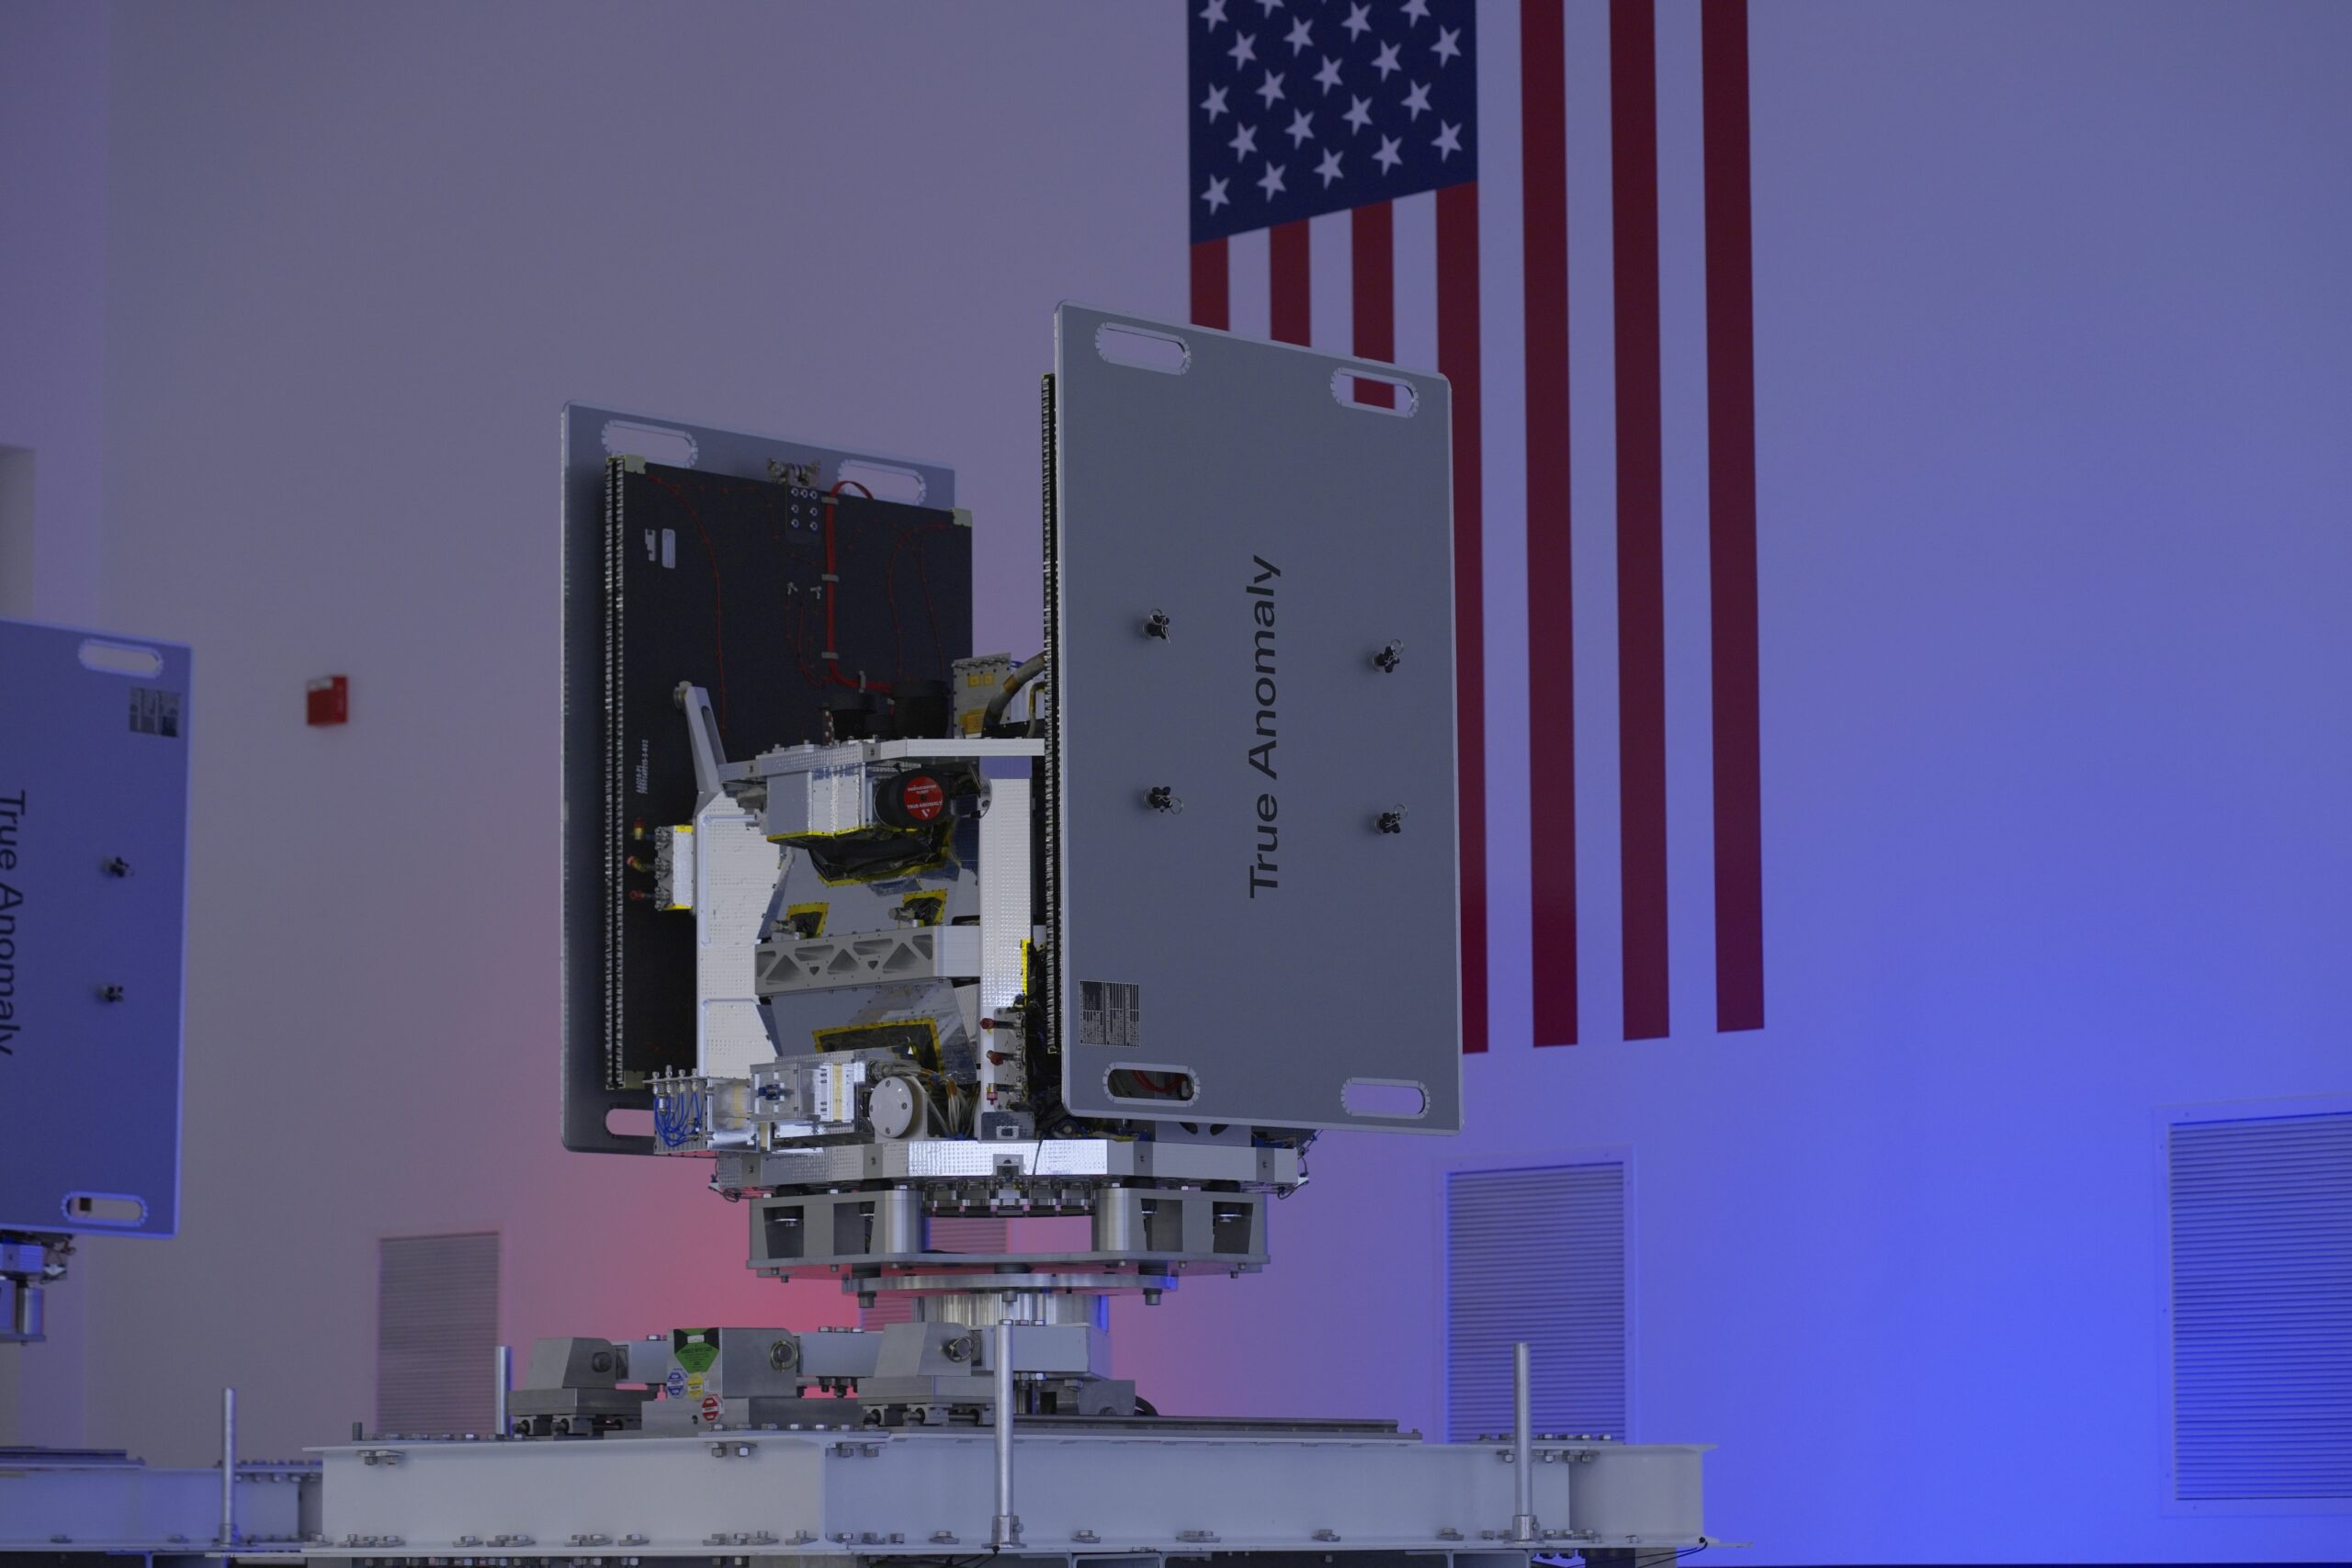 WASHINGTON — Space startup True Anomaly is preparing for the launch of its first two satellites, designed to maneuver in close proximity to other ob